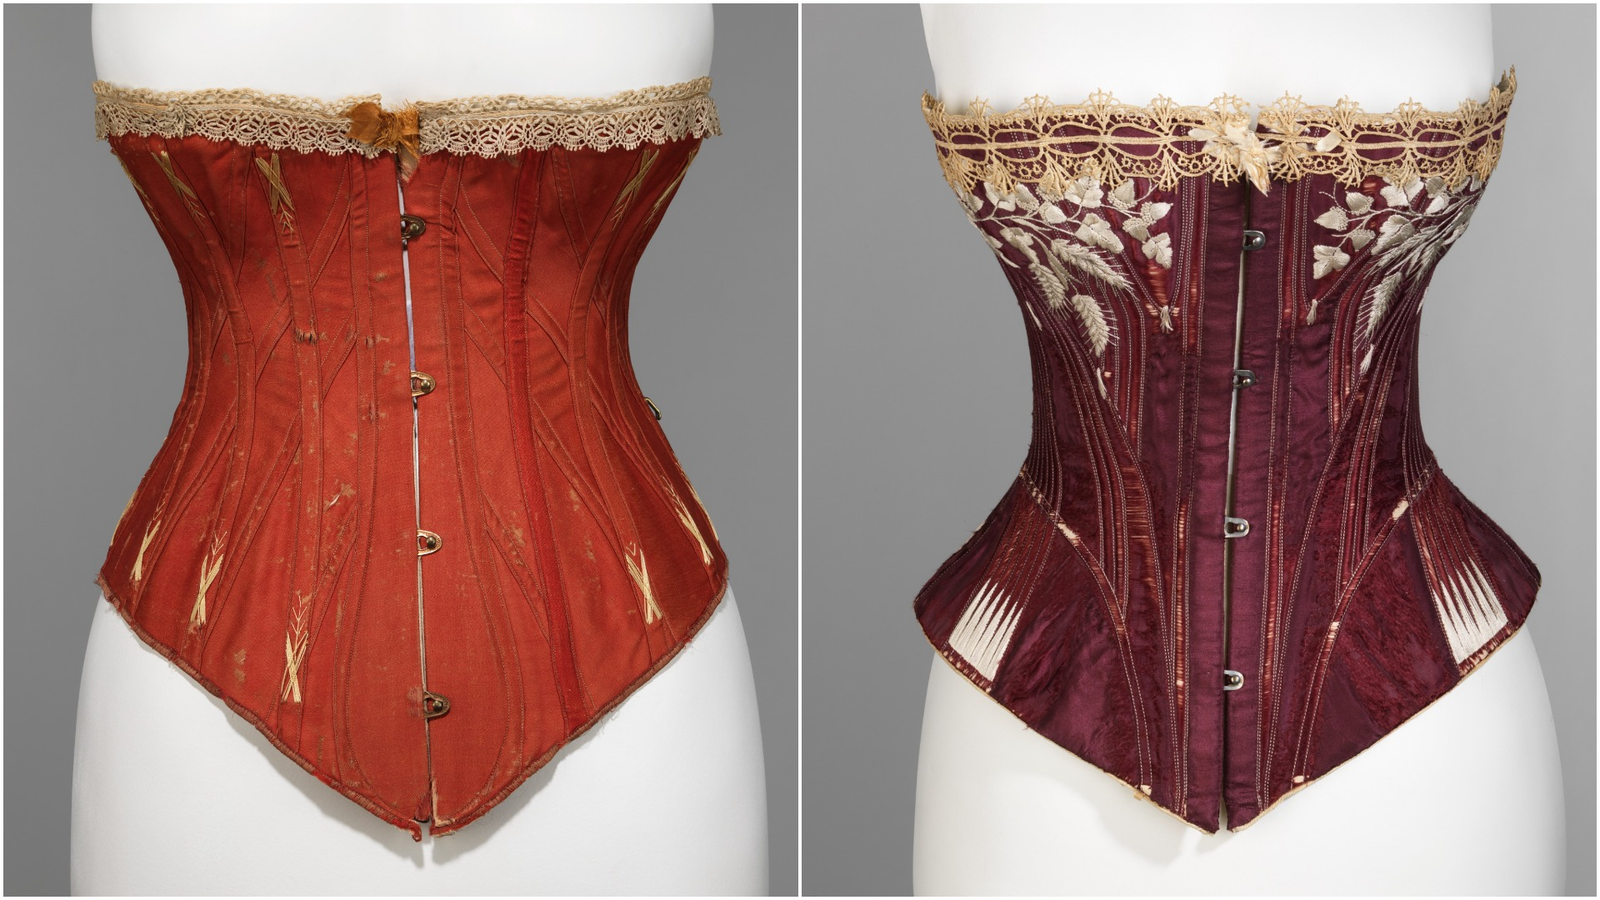 Are corsets uncomfortable? Bad for posture? Dangerous? Here are 5